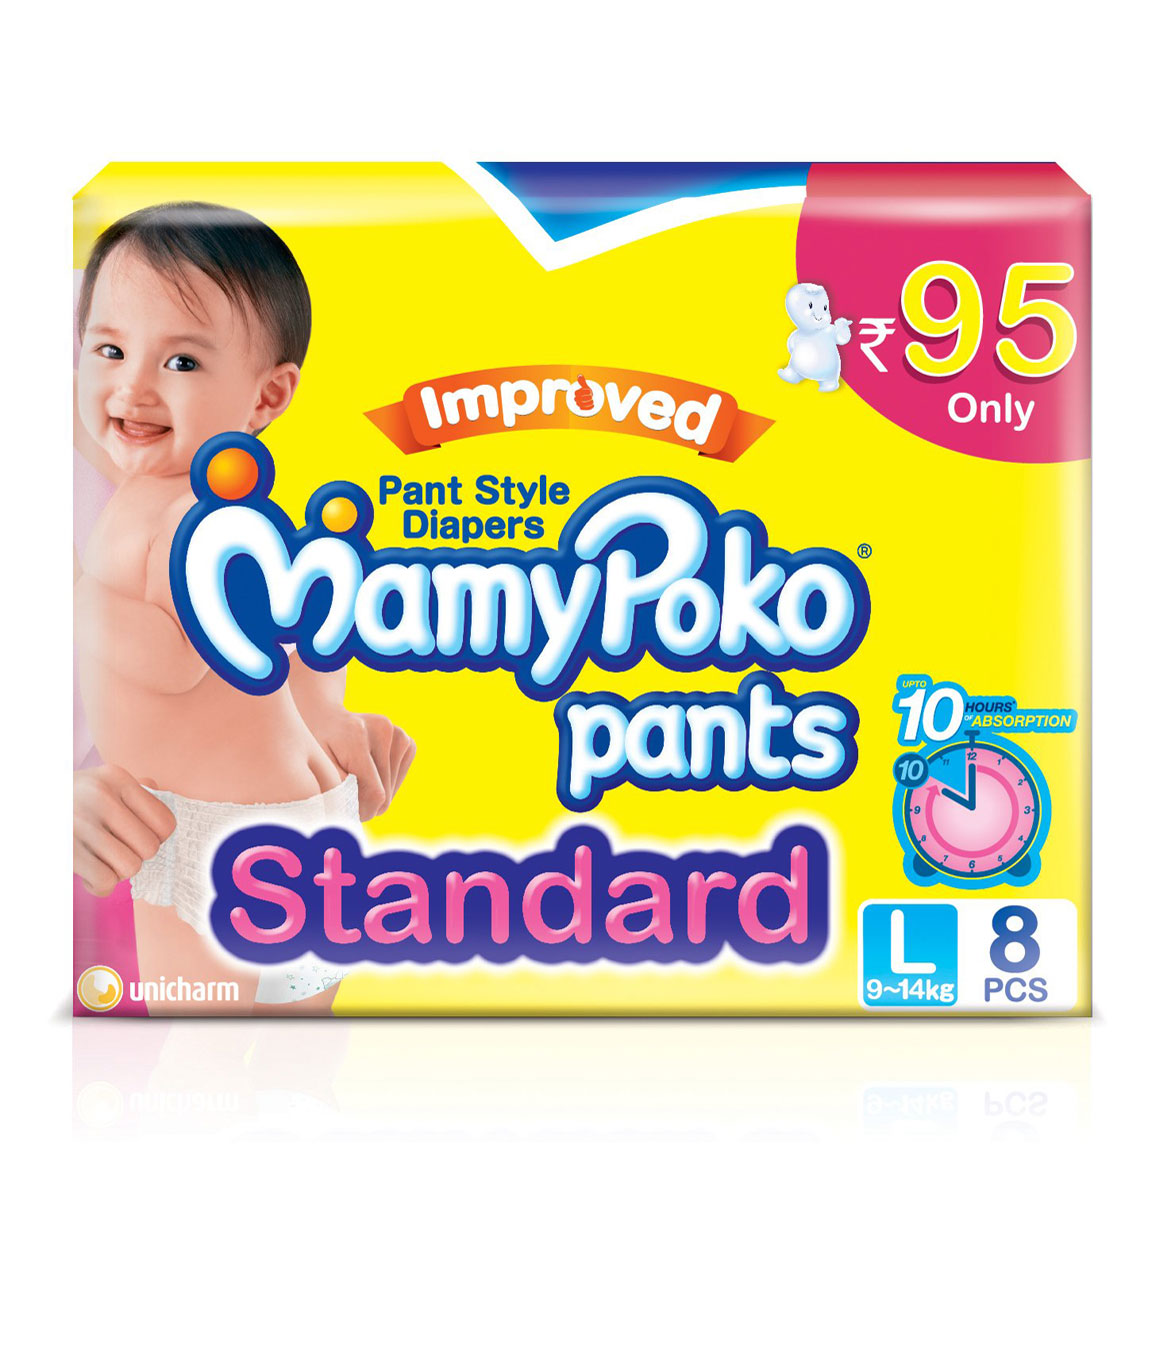 Mamy Poko Large Size Pants 32 Count